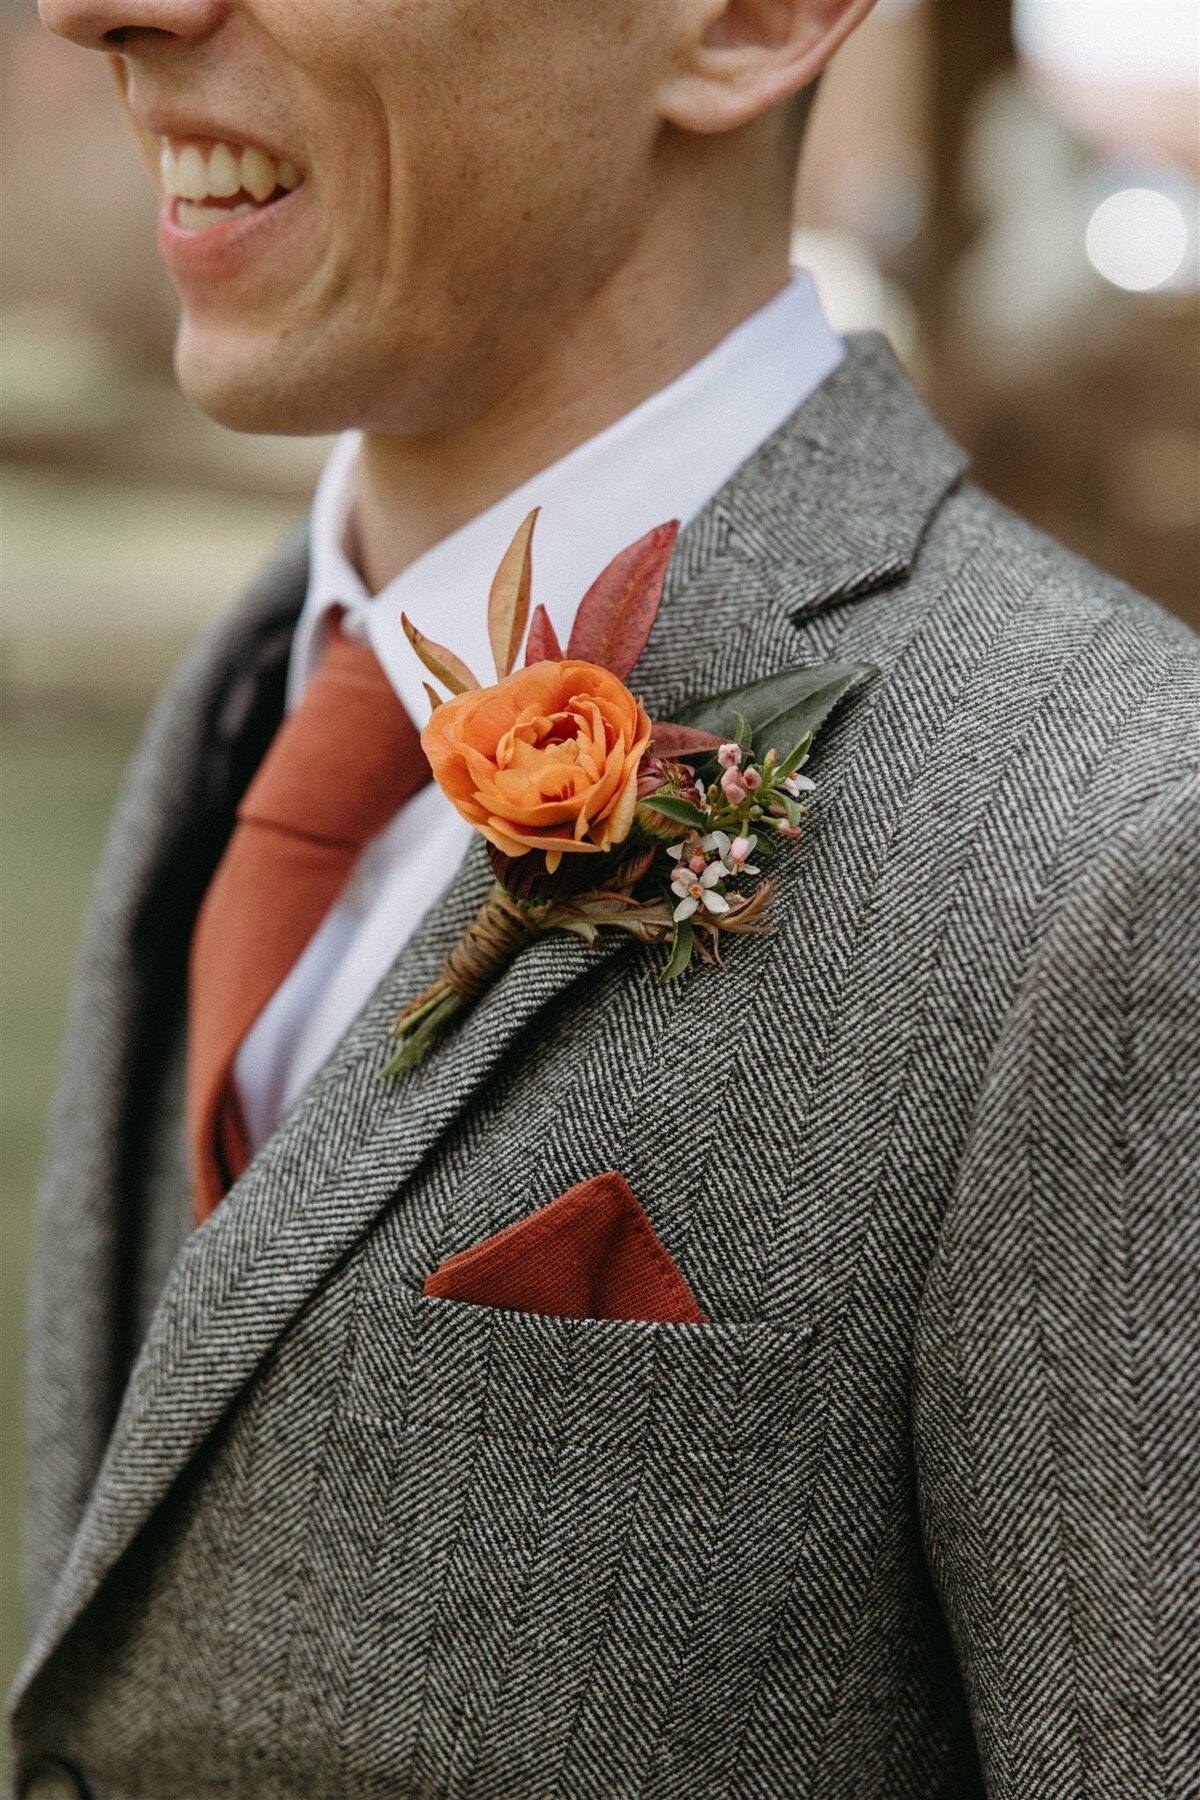 Groom wearing grey suit with orange flower boutonniere